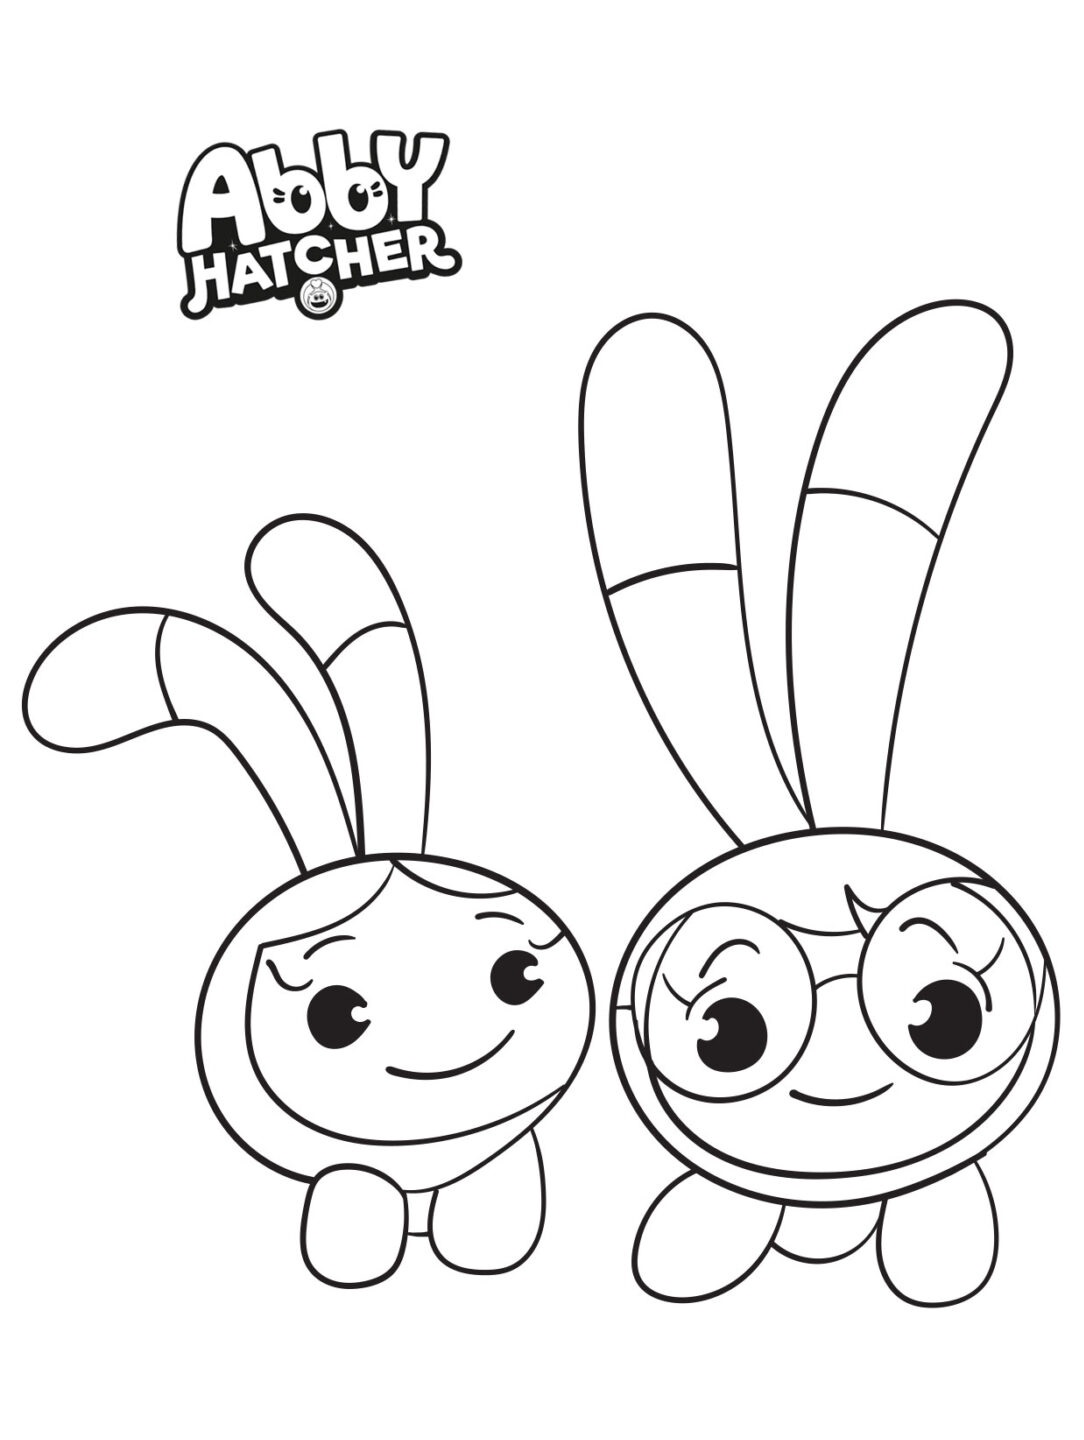 Printable Abby Hatcher Coloring Pages Pdf For Kids - Abby Hatcher Squeaky Peepers Coloring Pages